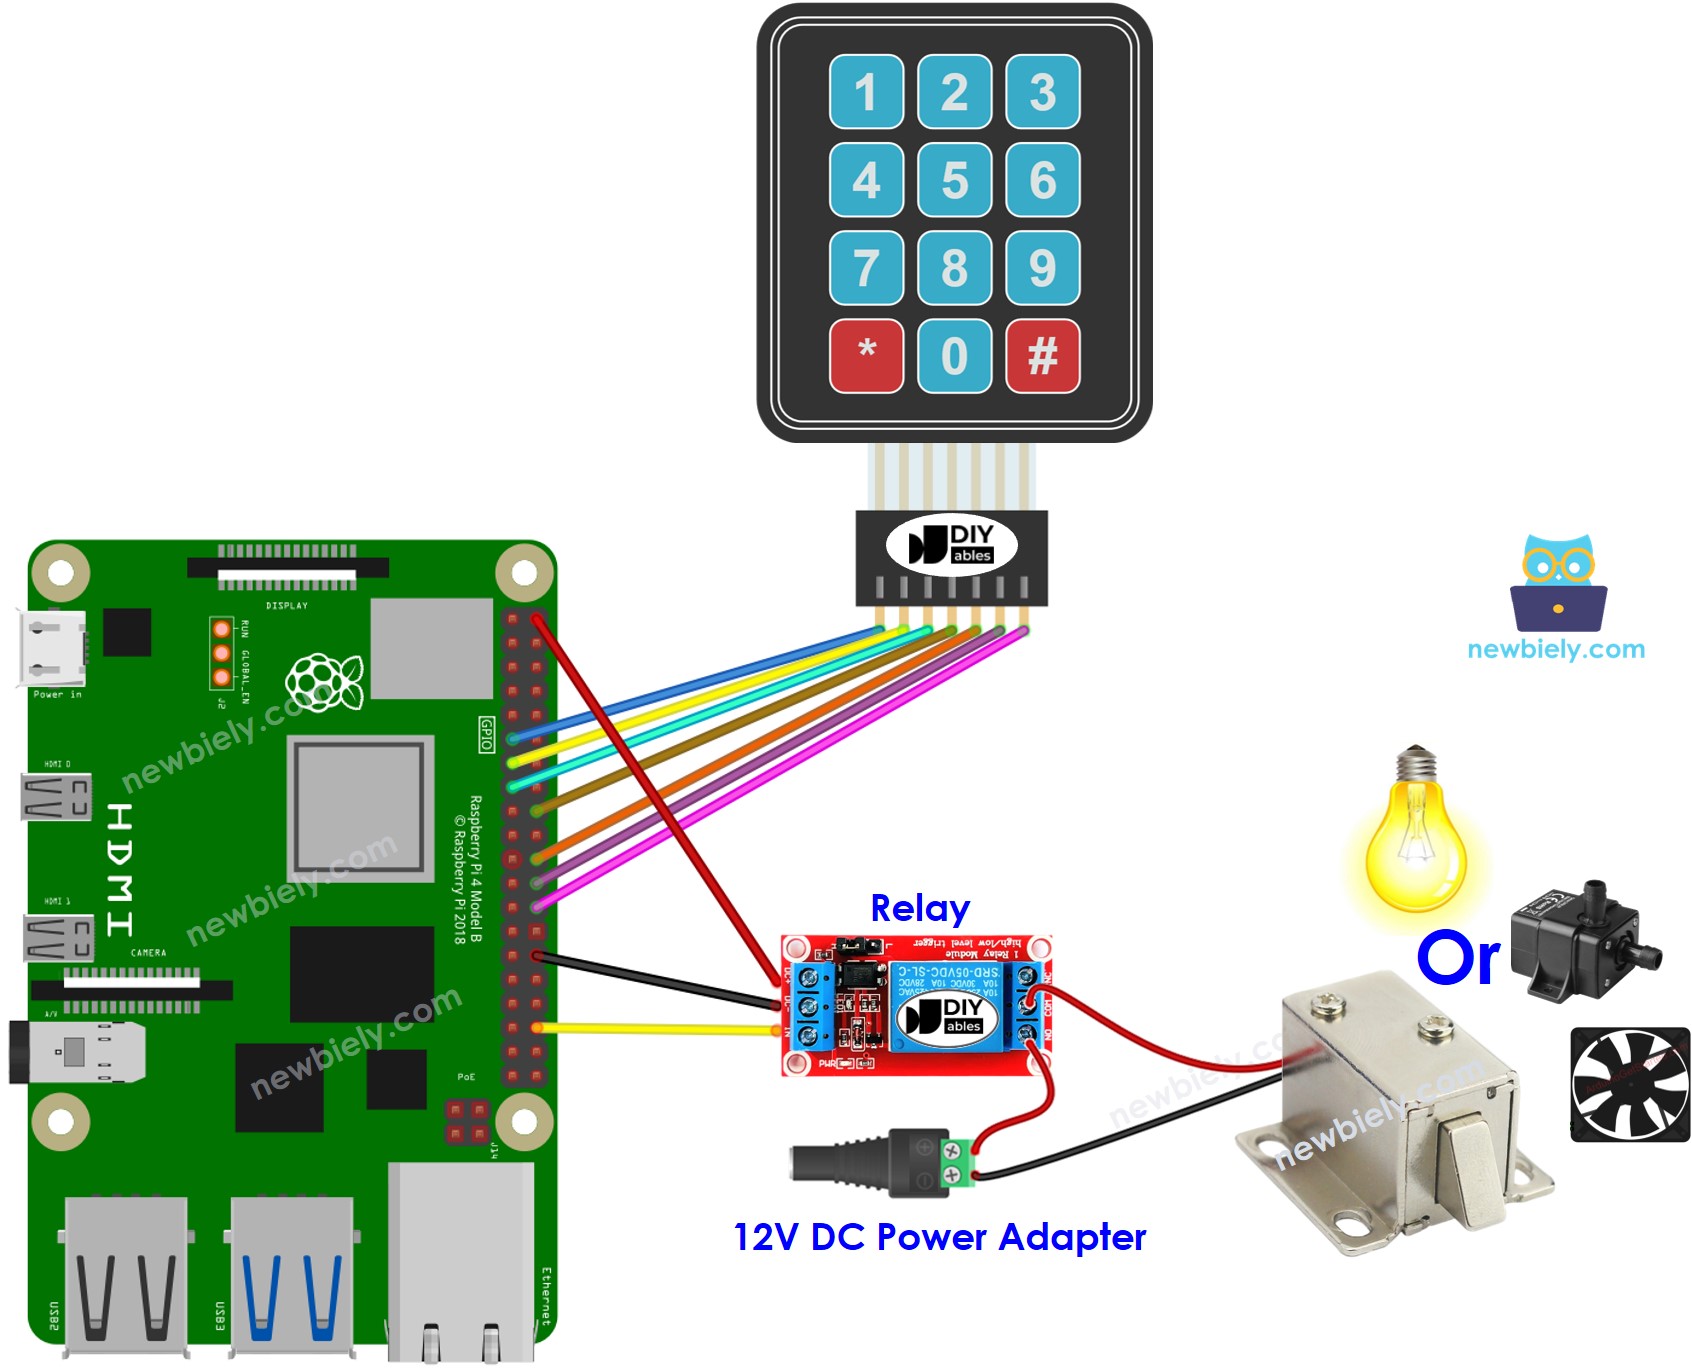 The wiring diagram between Raspberry Pi and keypad relay